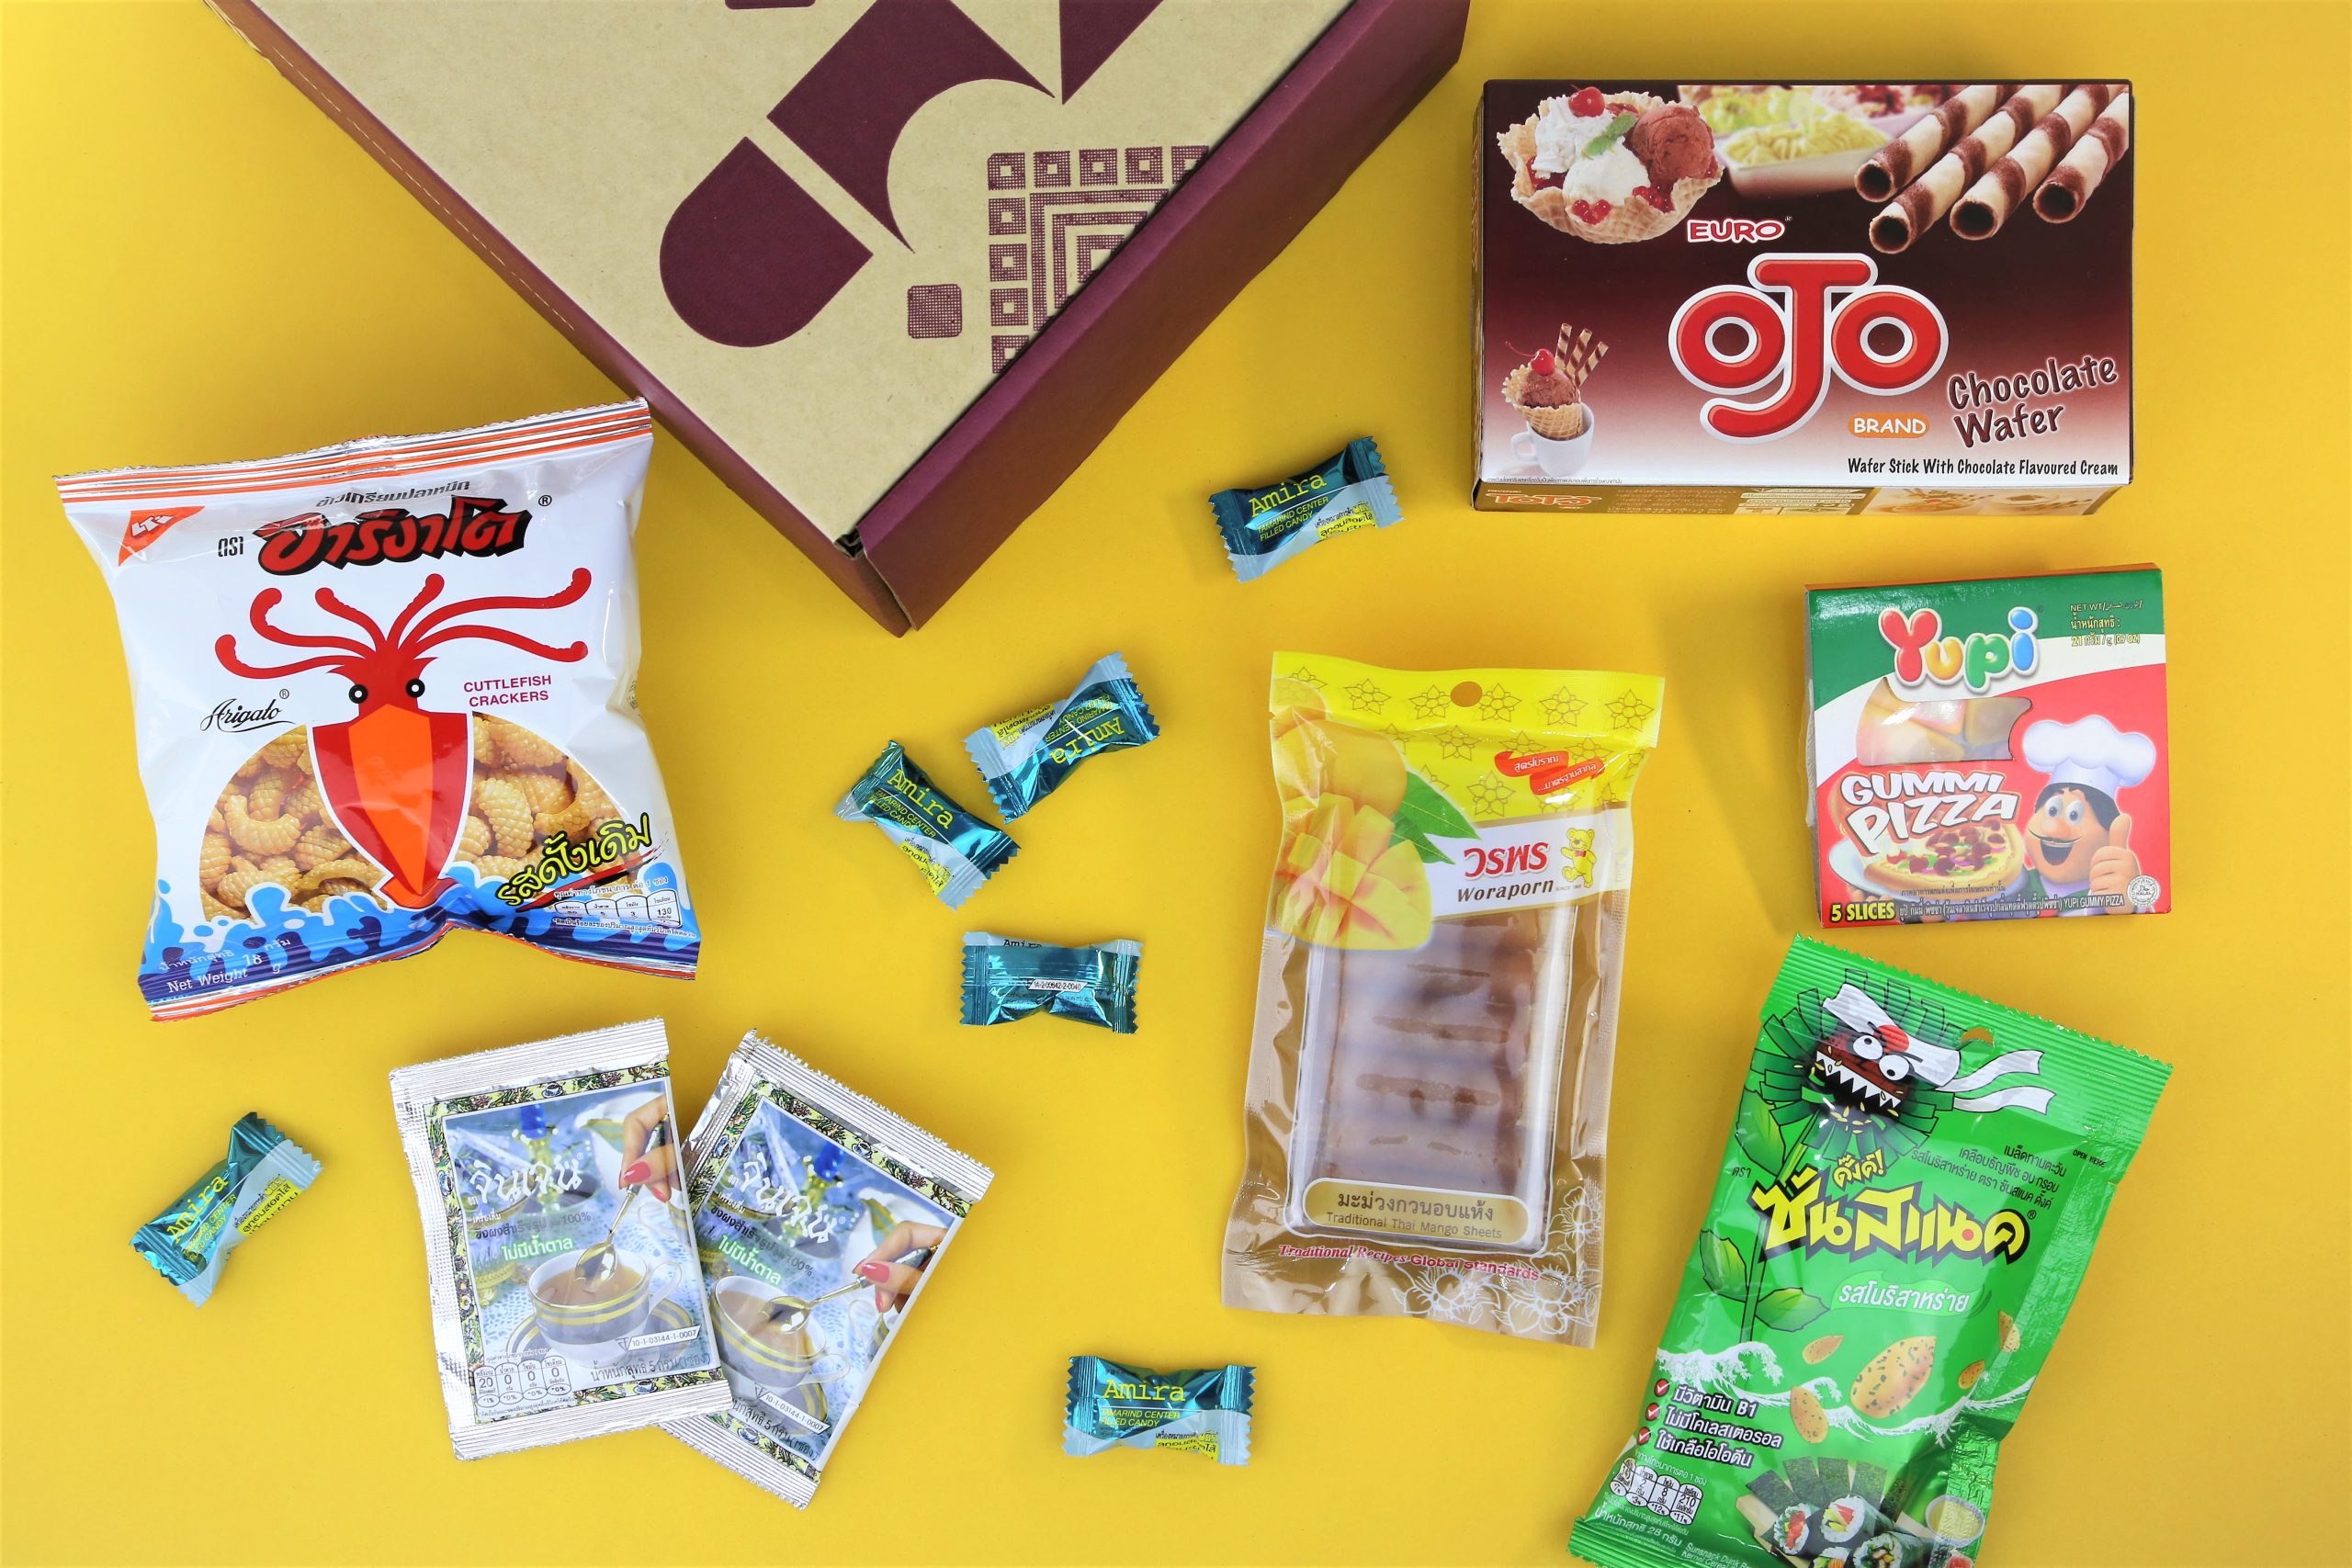 Heap Brand box with classic Thai snacks and drink